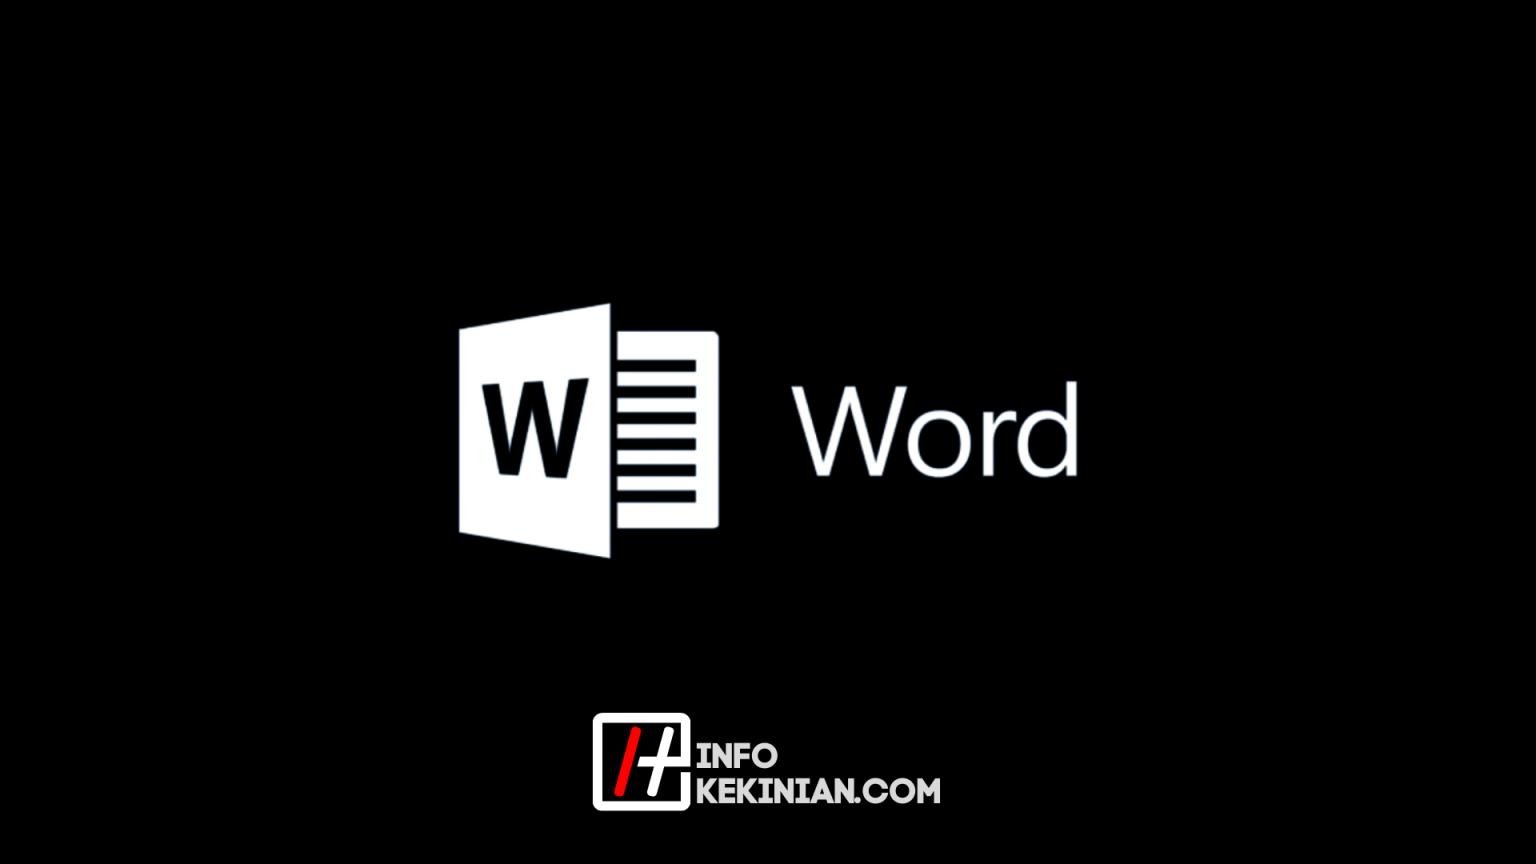 microsoft word download for mac os x 10.9.5